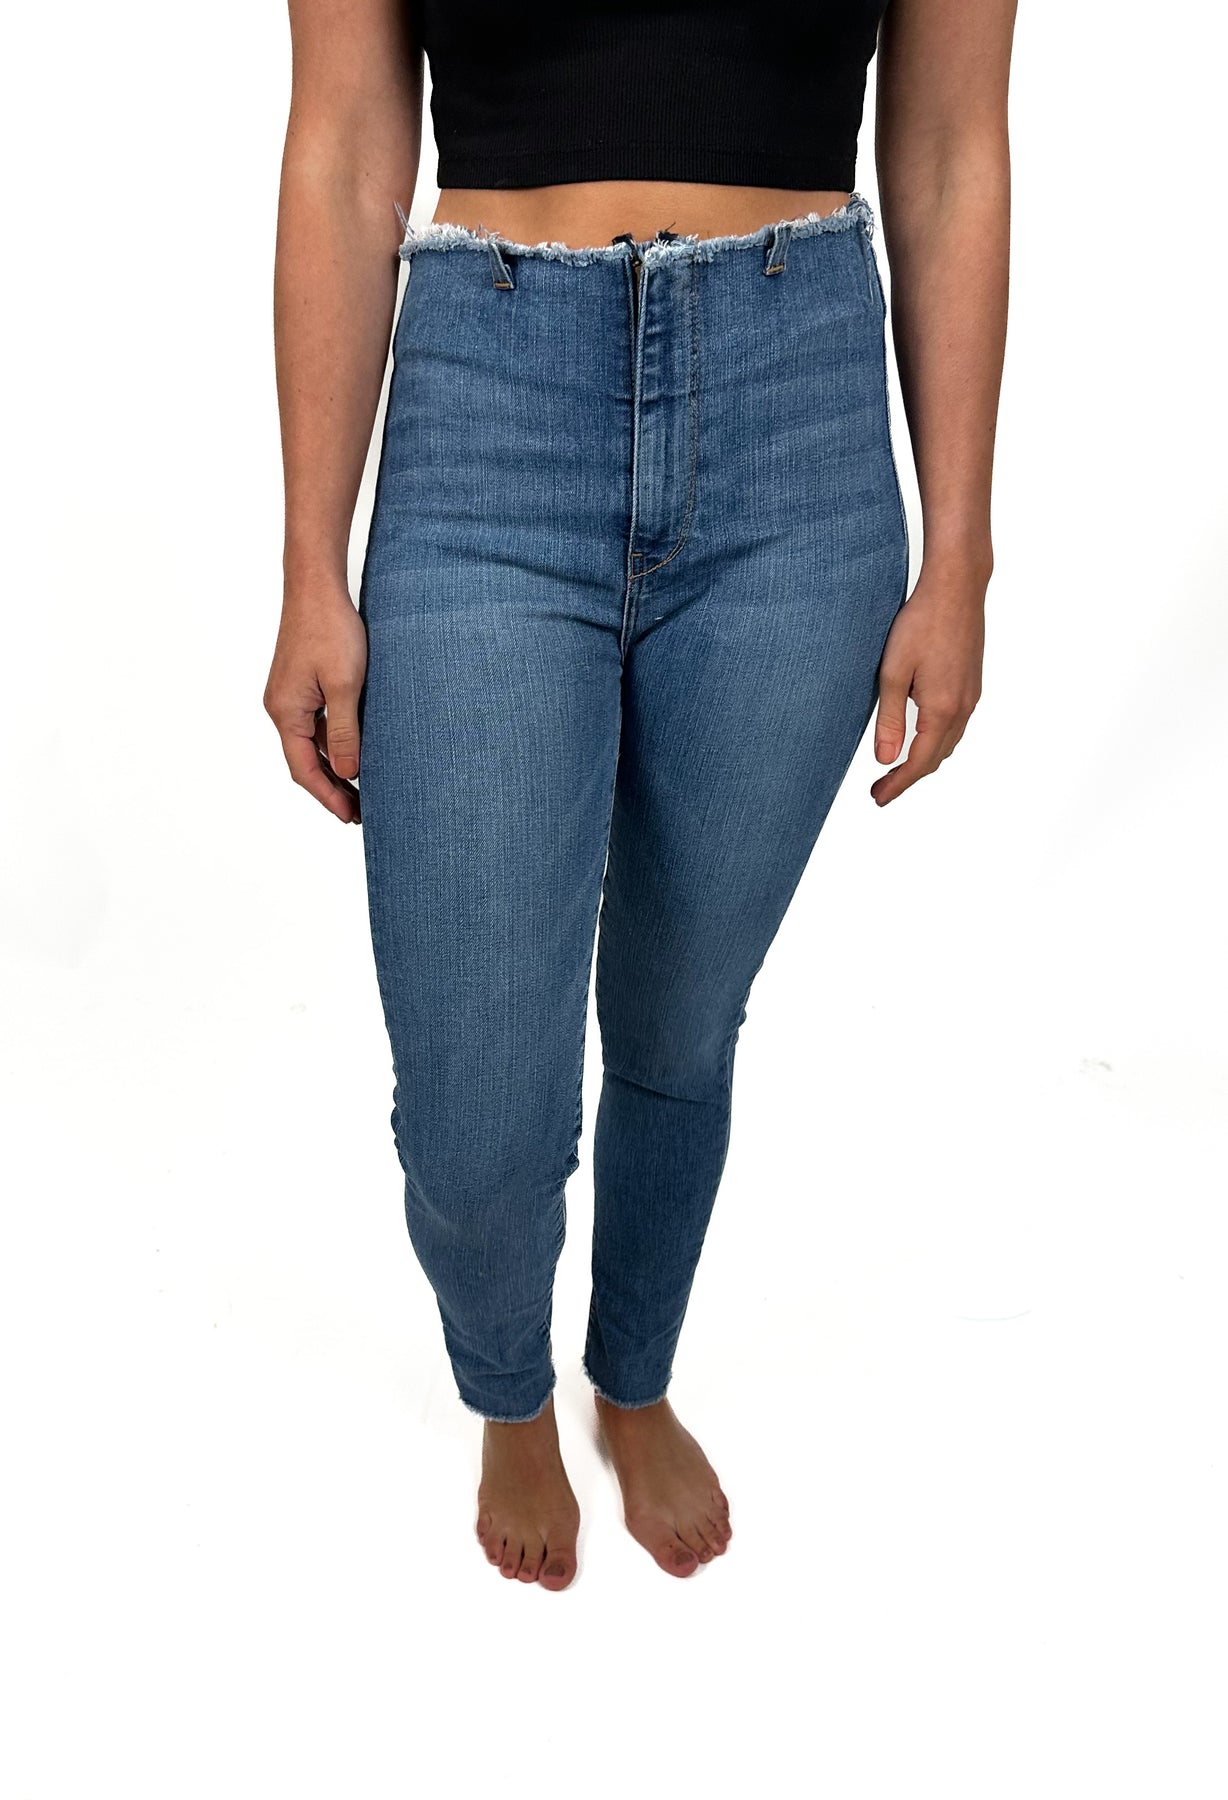 Annagrace Plus Size High-Rise Skinny Jeans